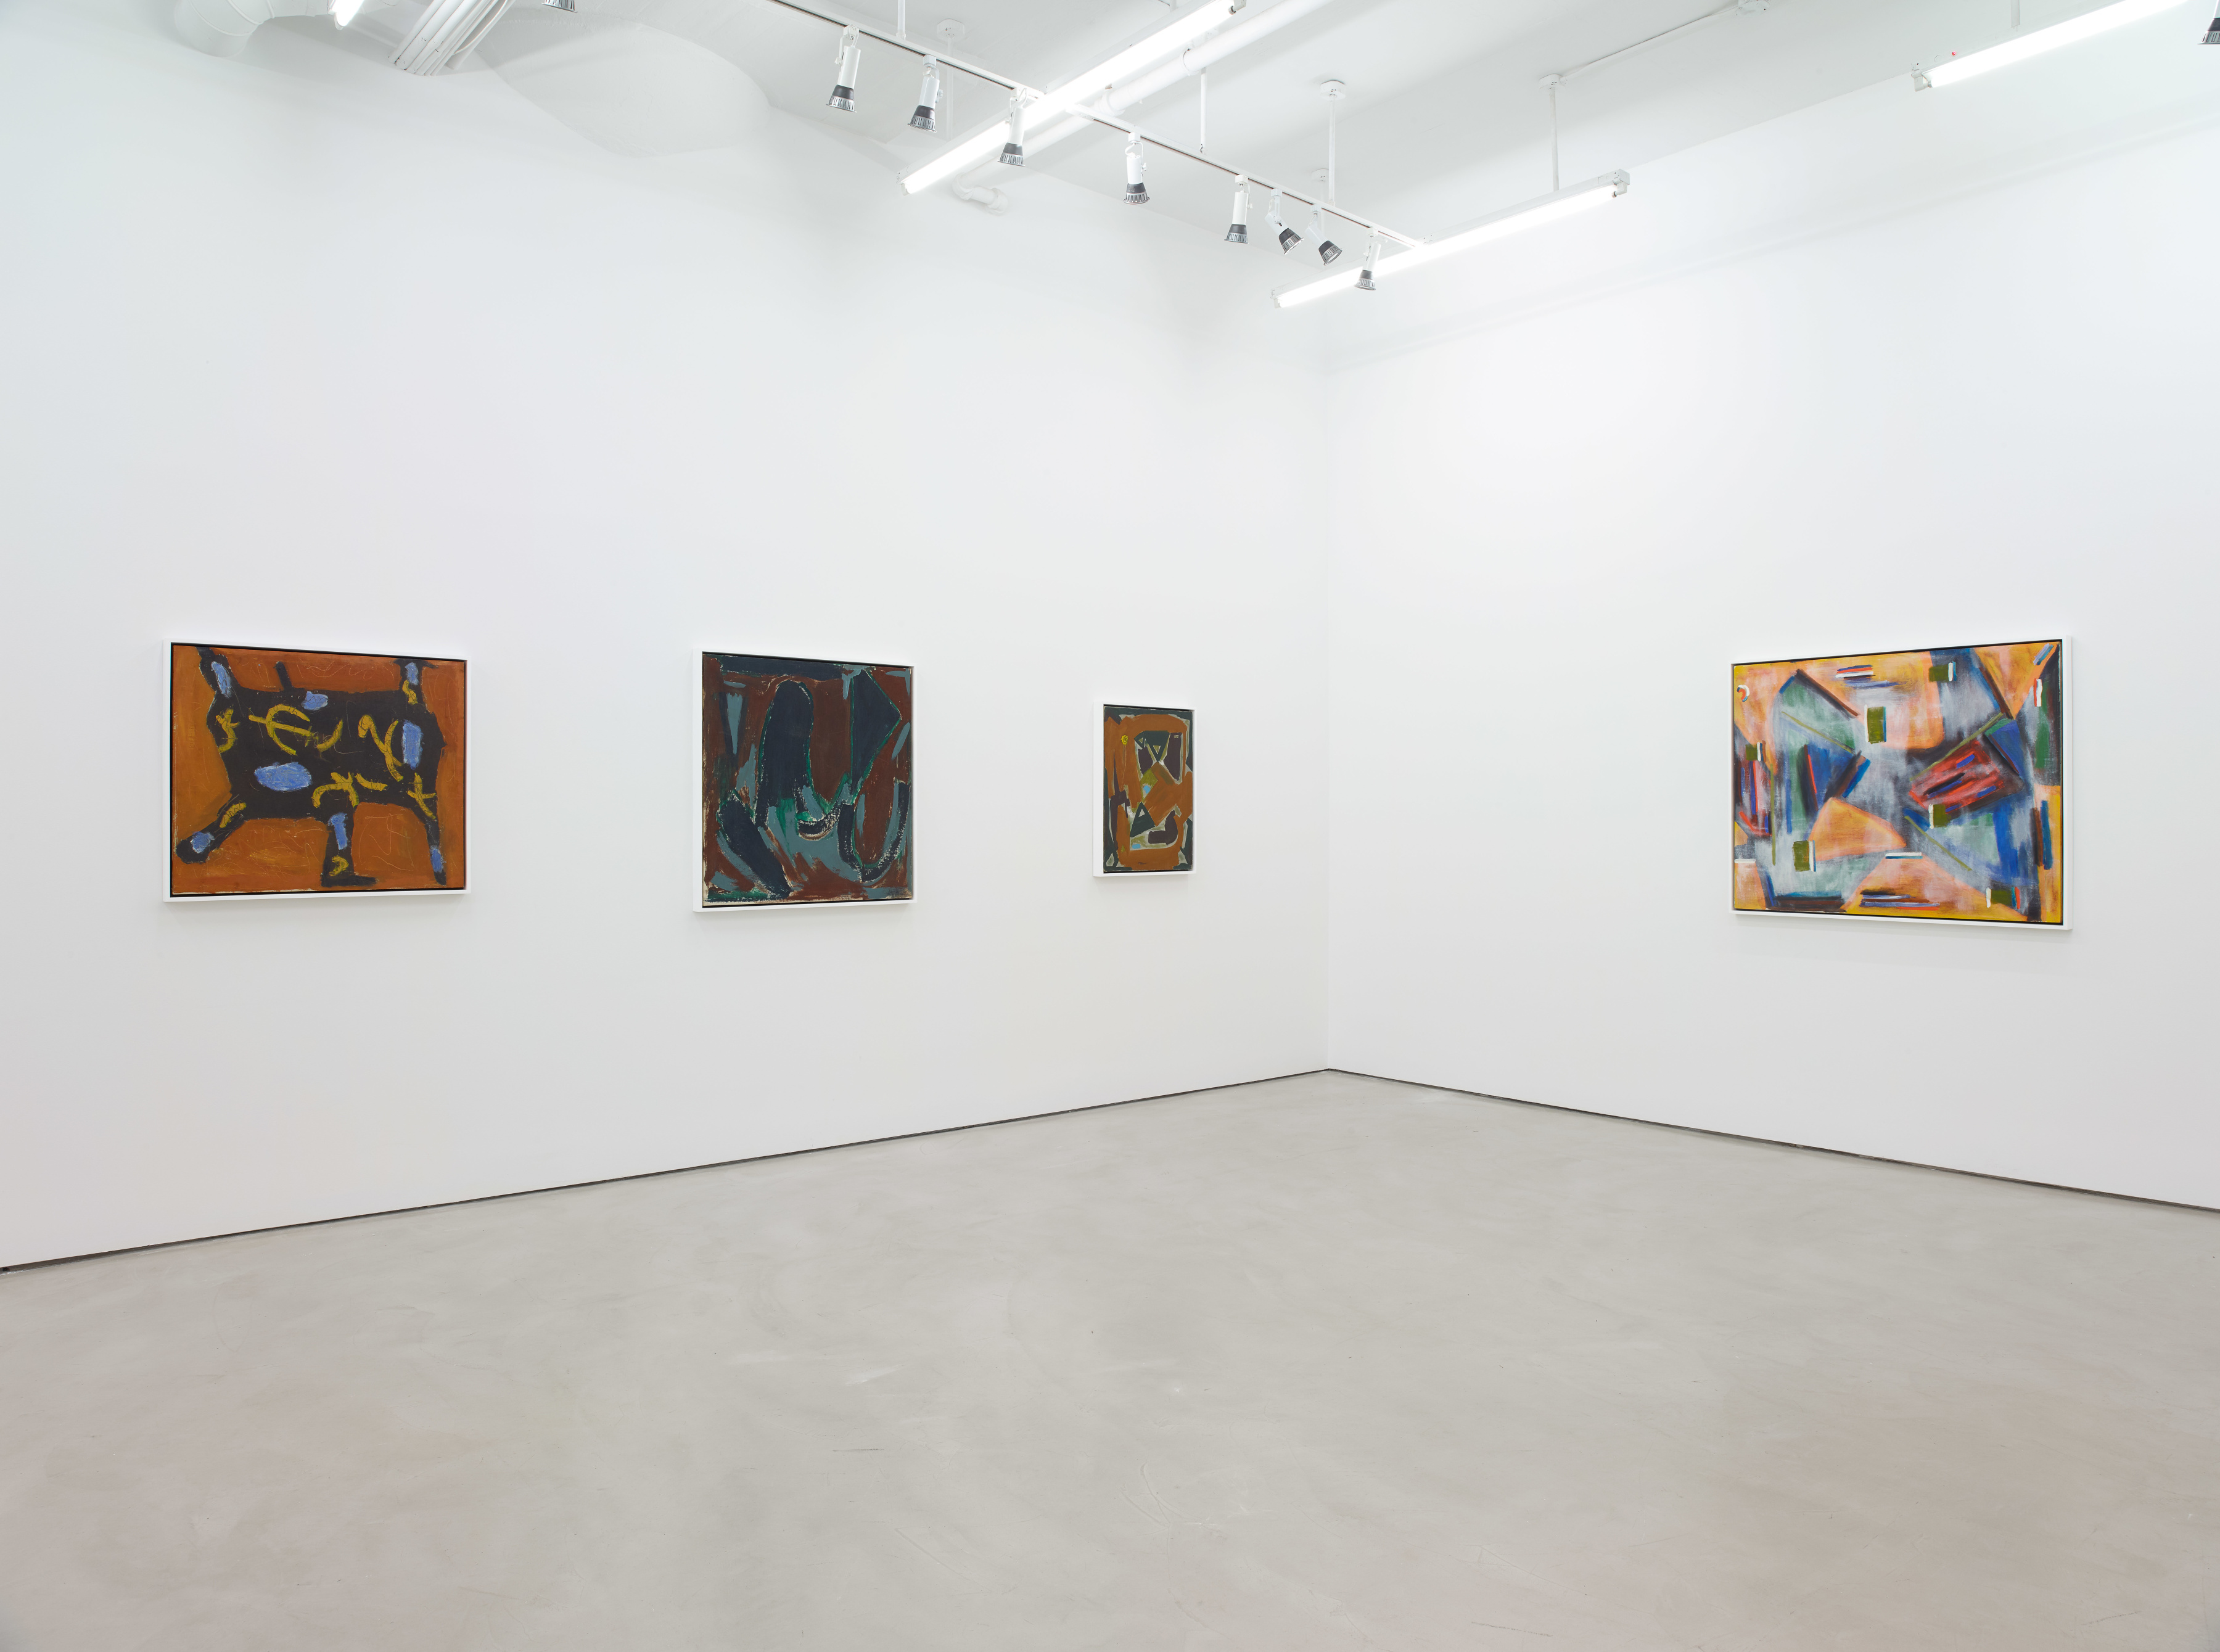 Betty Parsons: Invisible Presence, installation view, Alexander Gray Associates (2017)